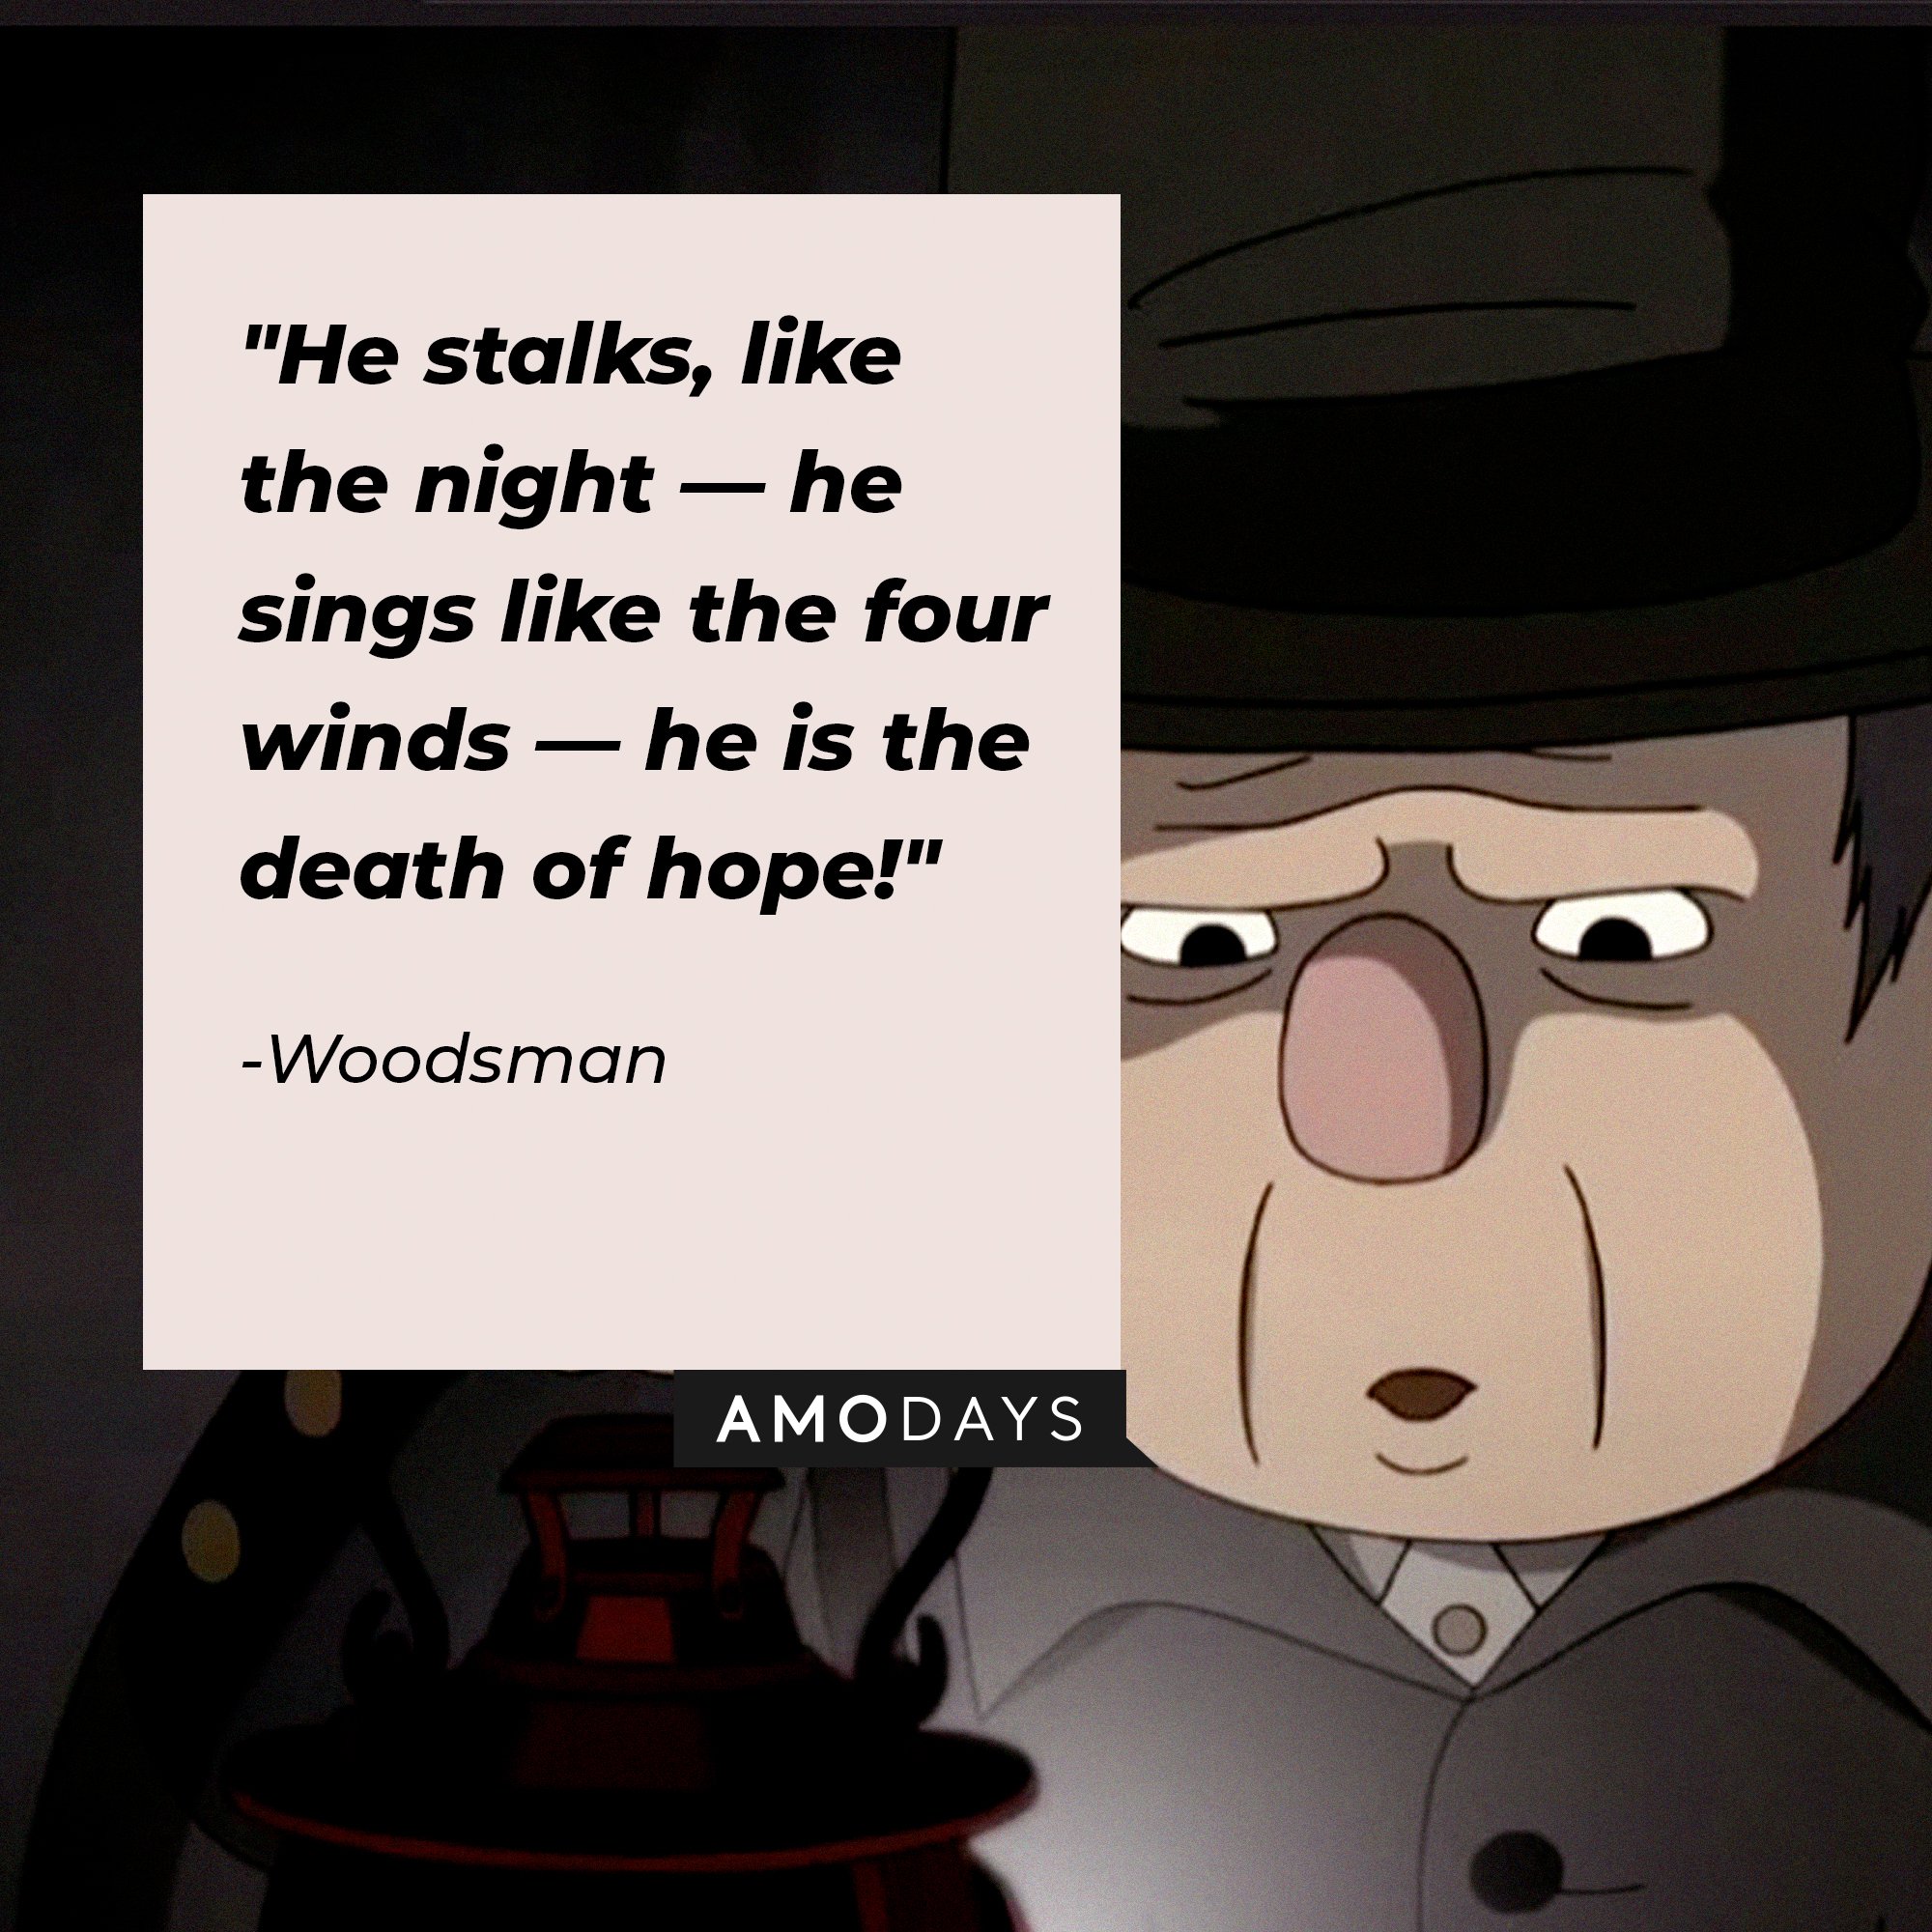 Woodsman’s quotes: "He stalks, like the night—he sings like the four winds—he is the death of hope!" | Image: AmoDays